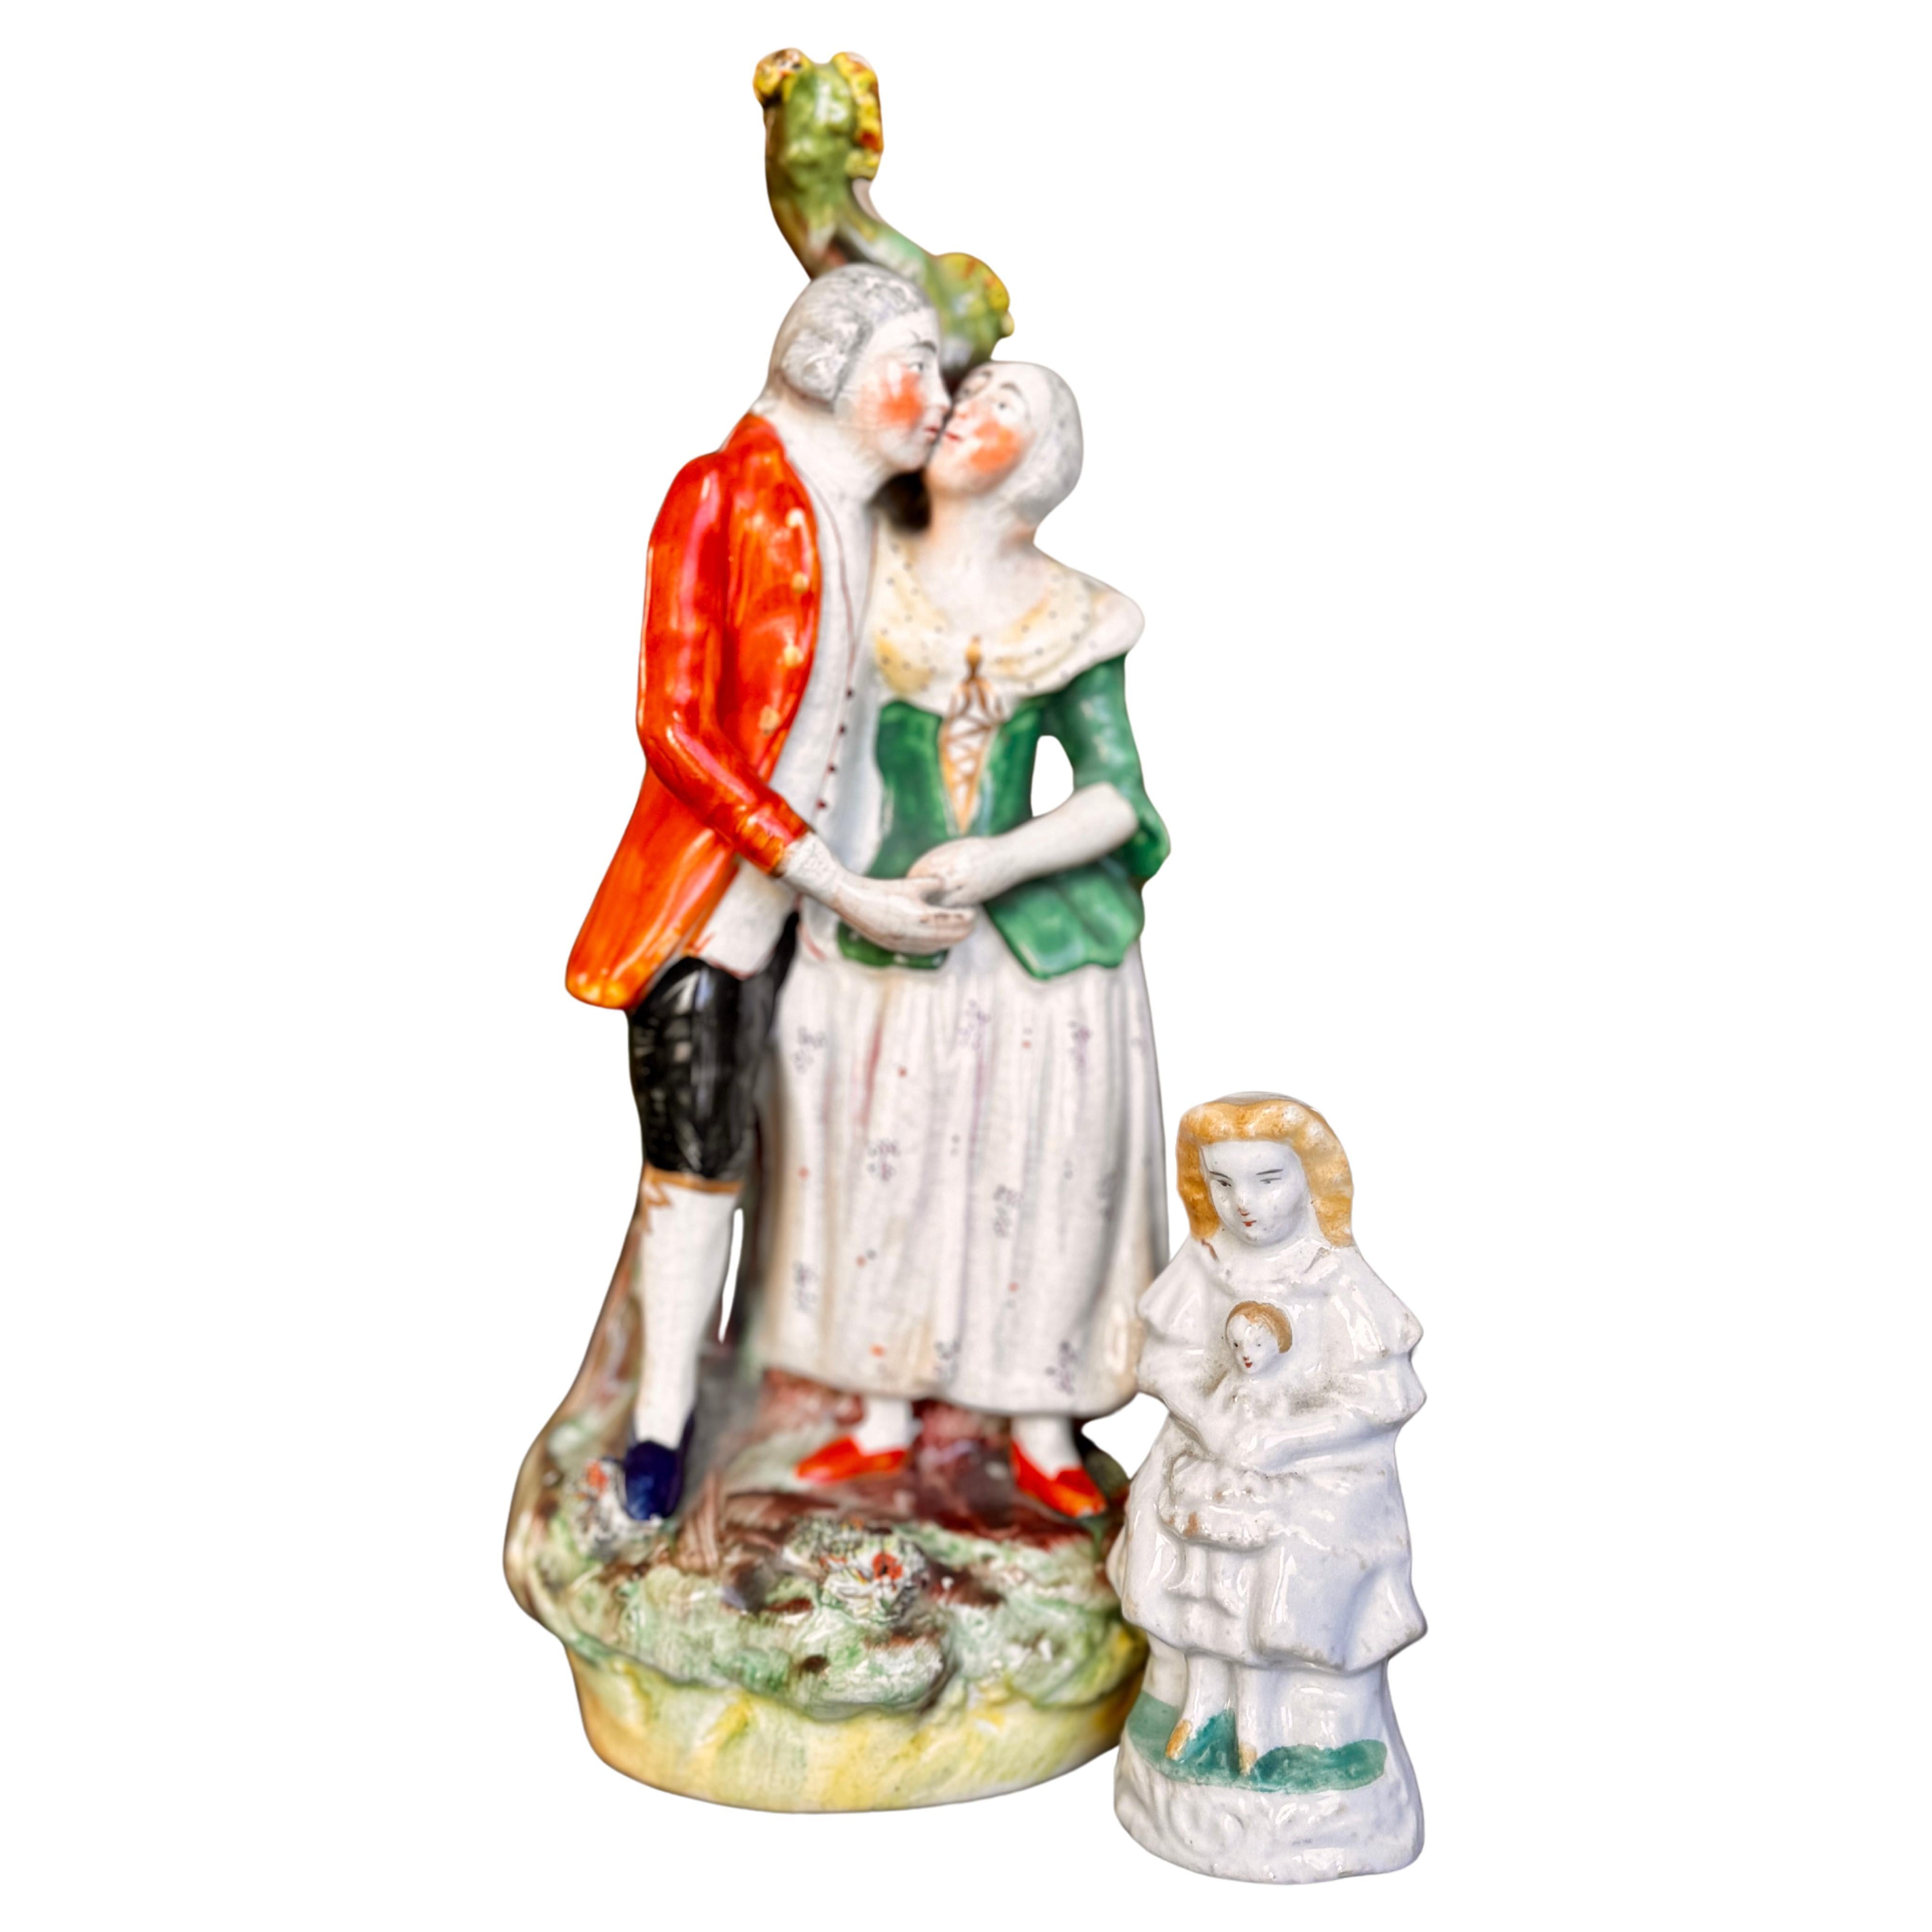 Two 19th Century European Hand-painted Porcelain 